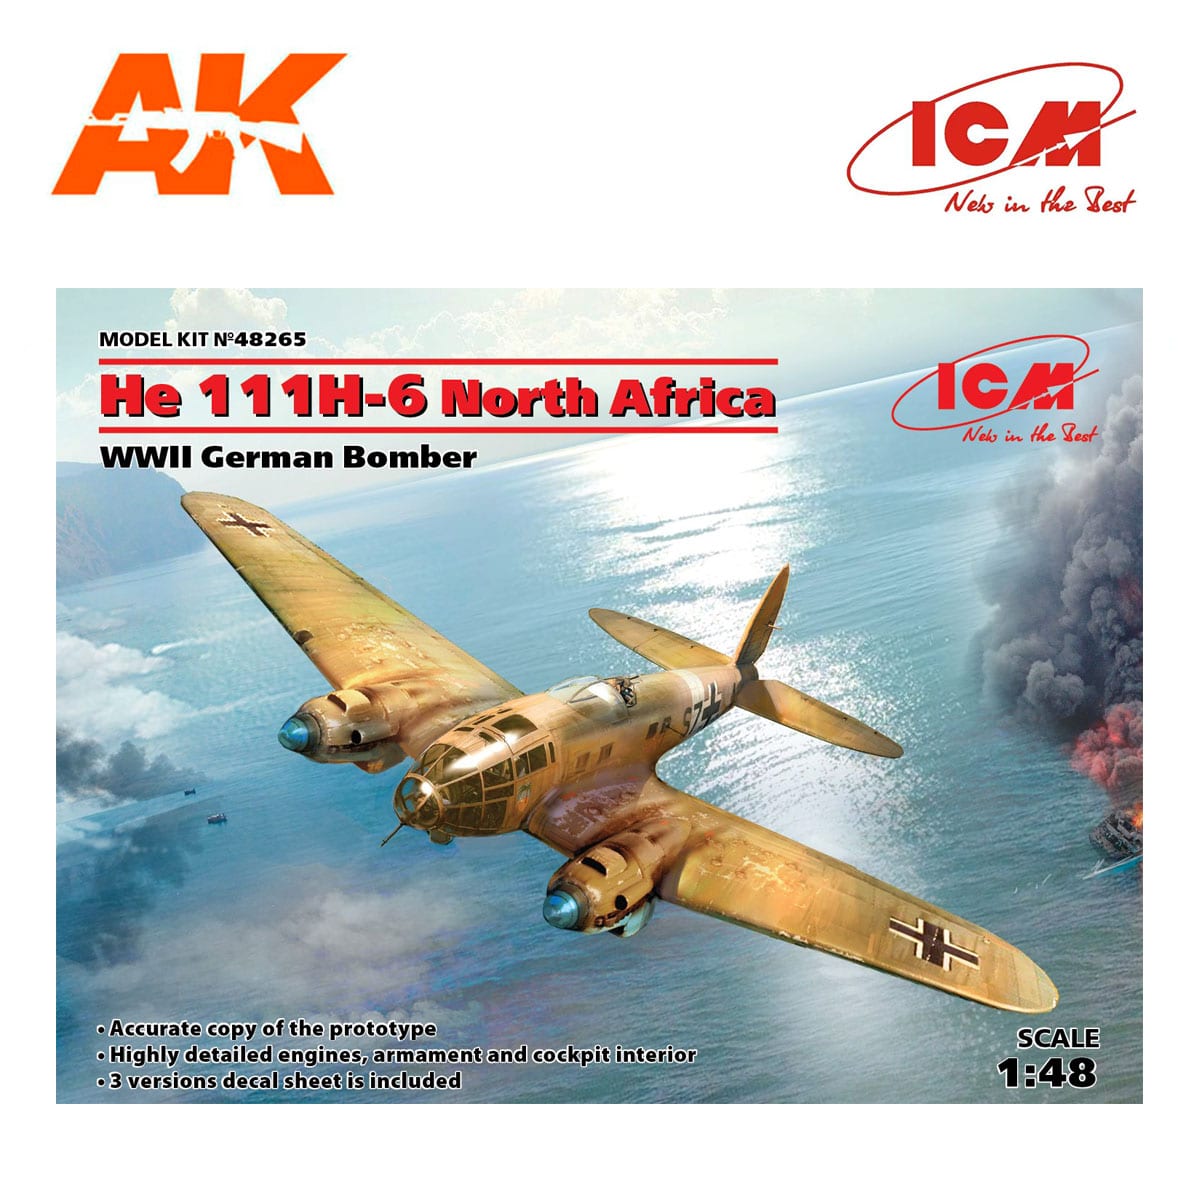 He 111H-6 North Africa, WWII German Bomber 1/48